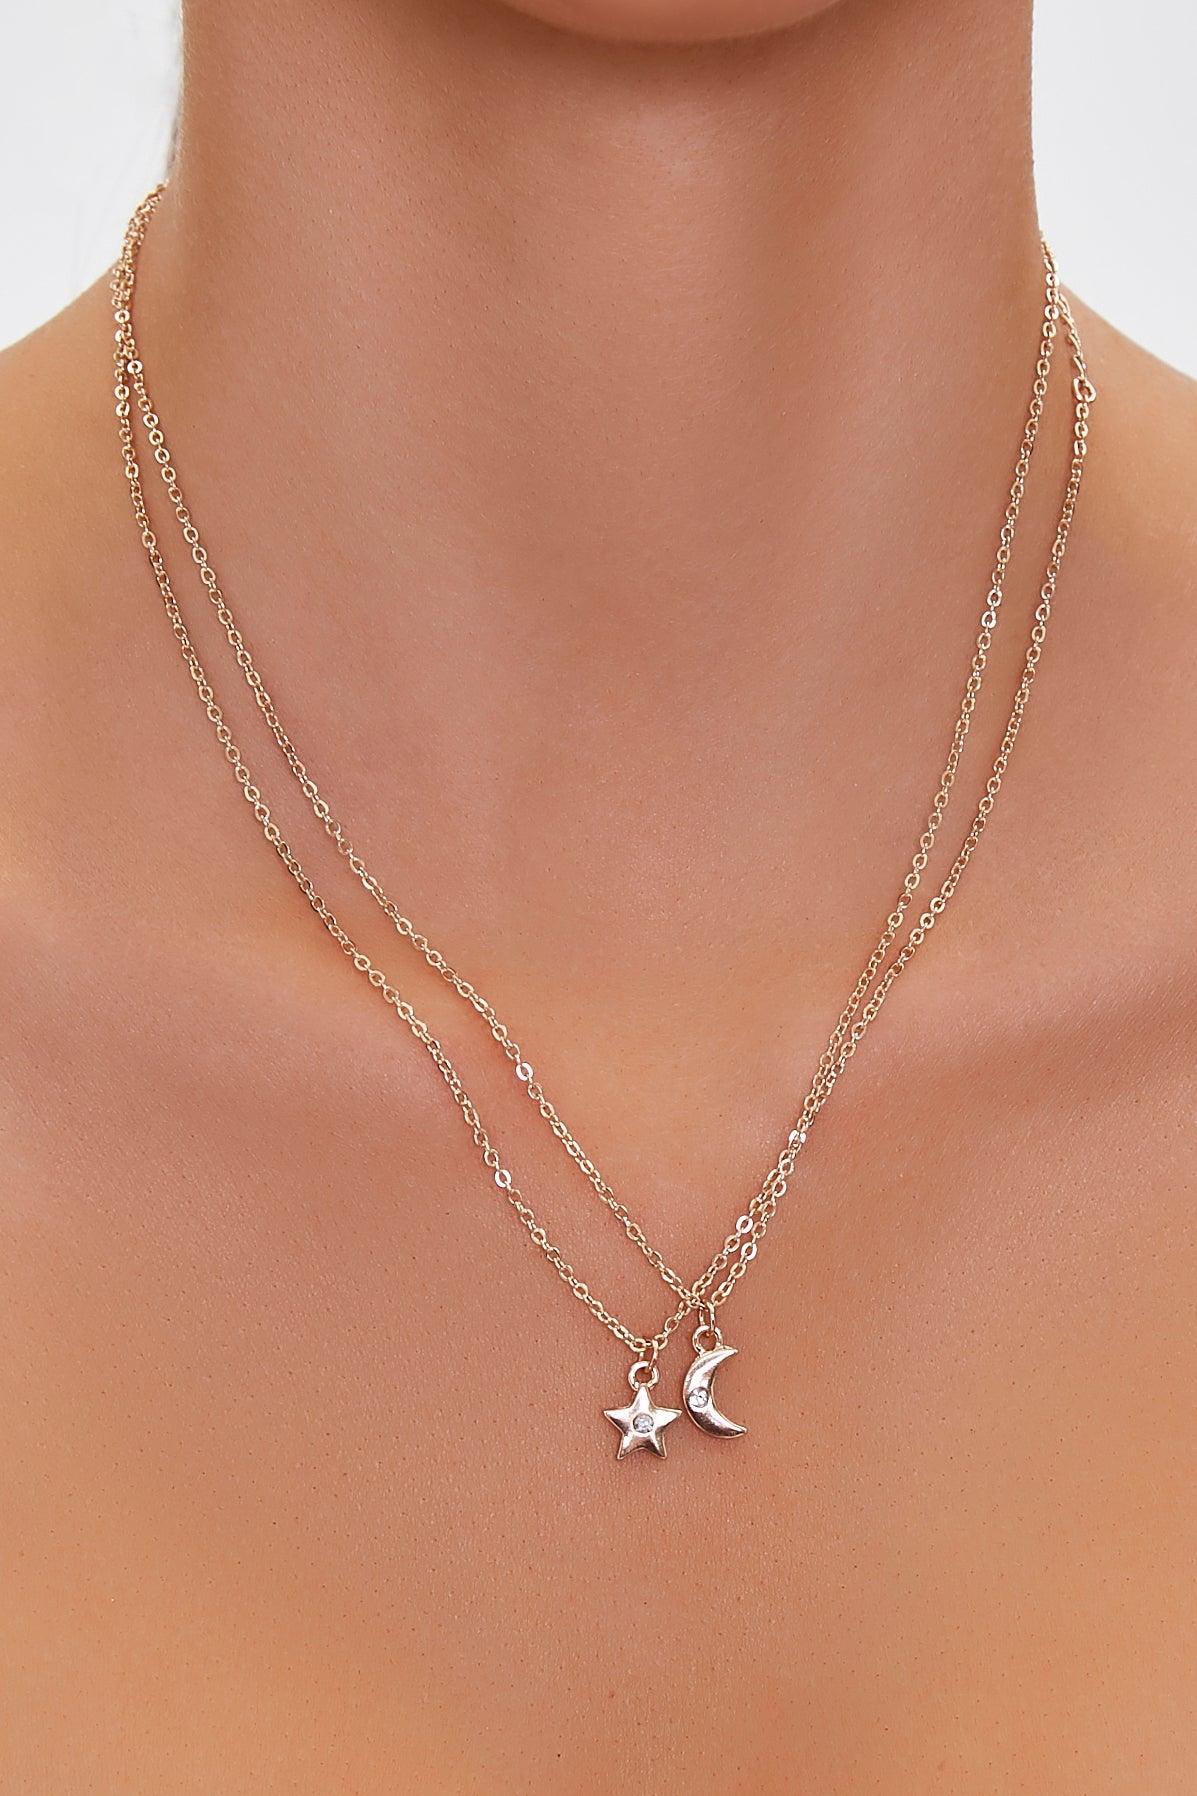 Gold Moon & Star Charm Necklace Set 